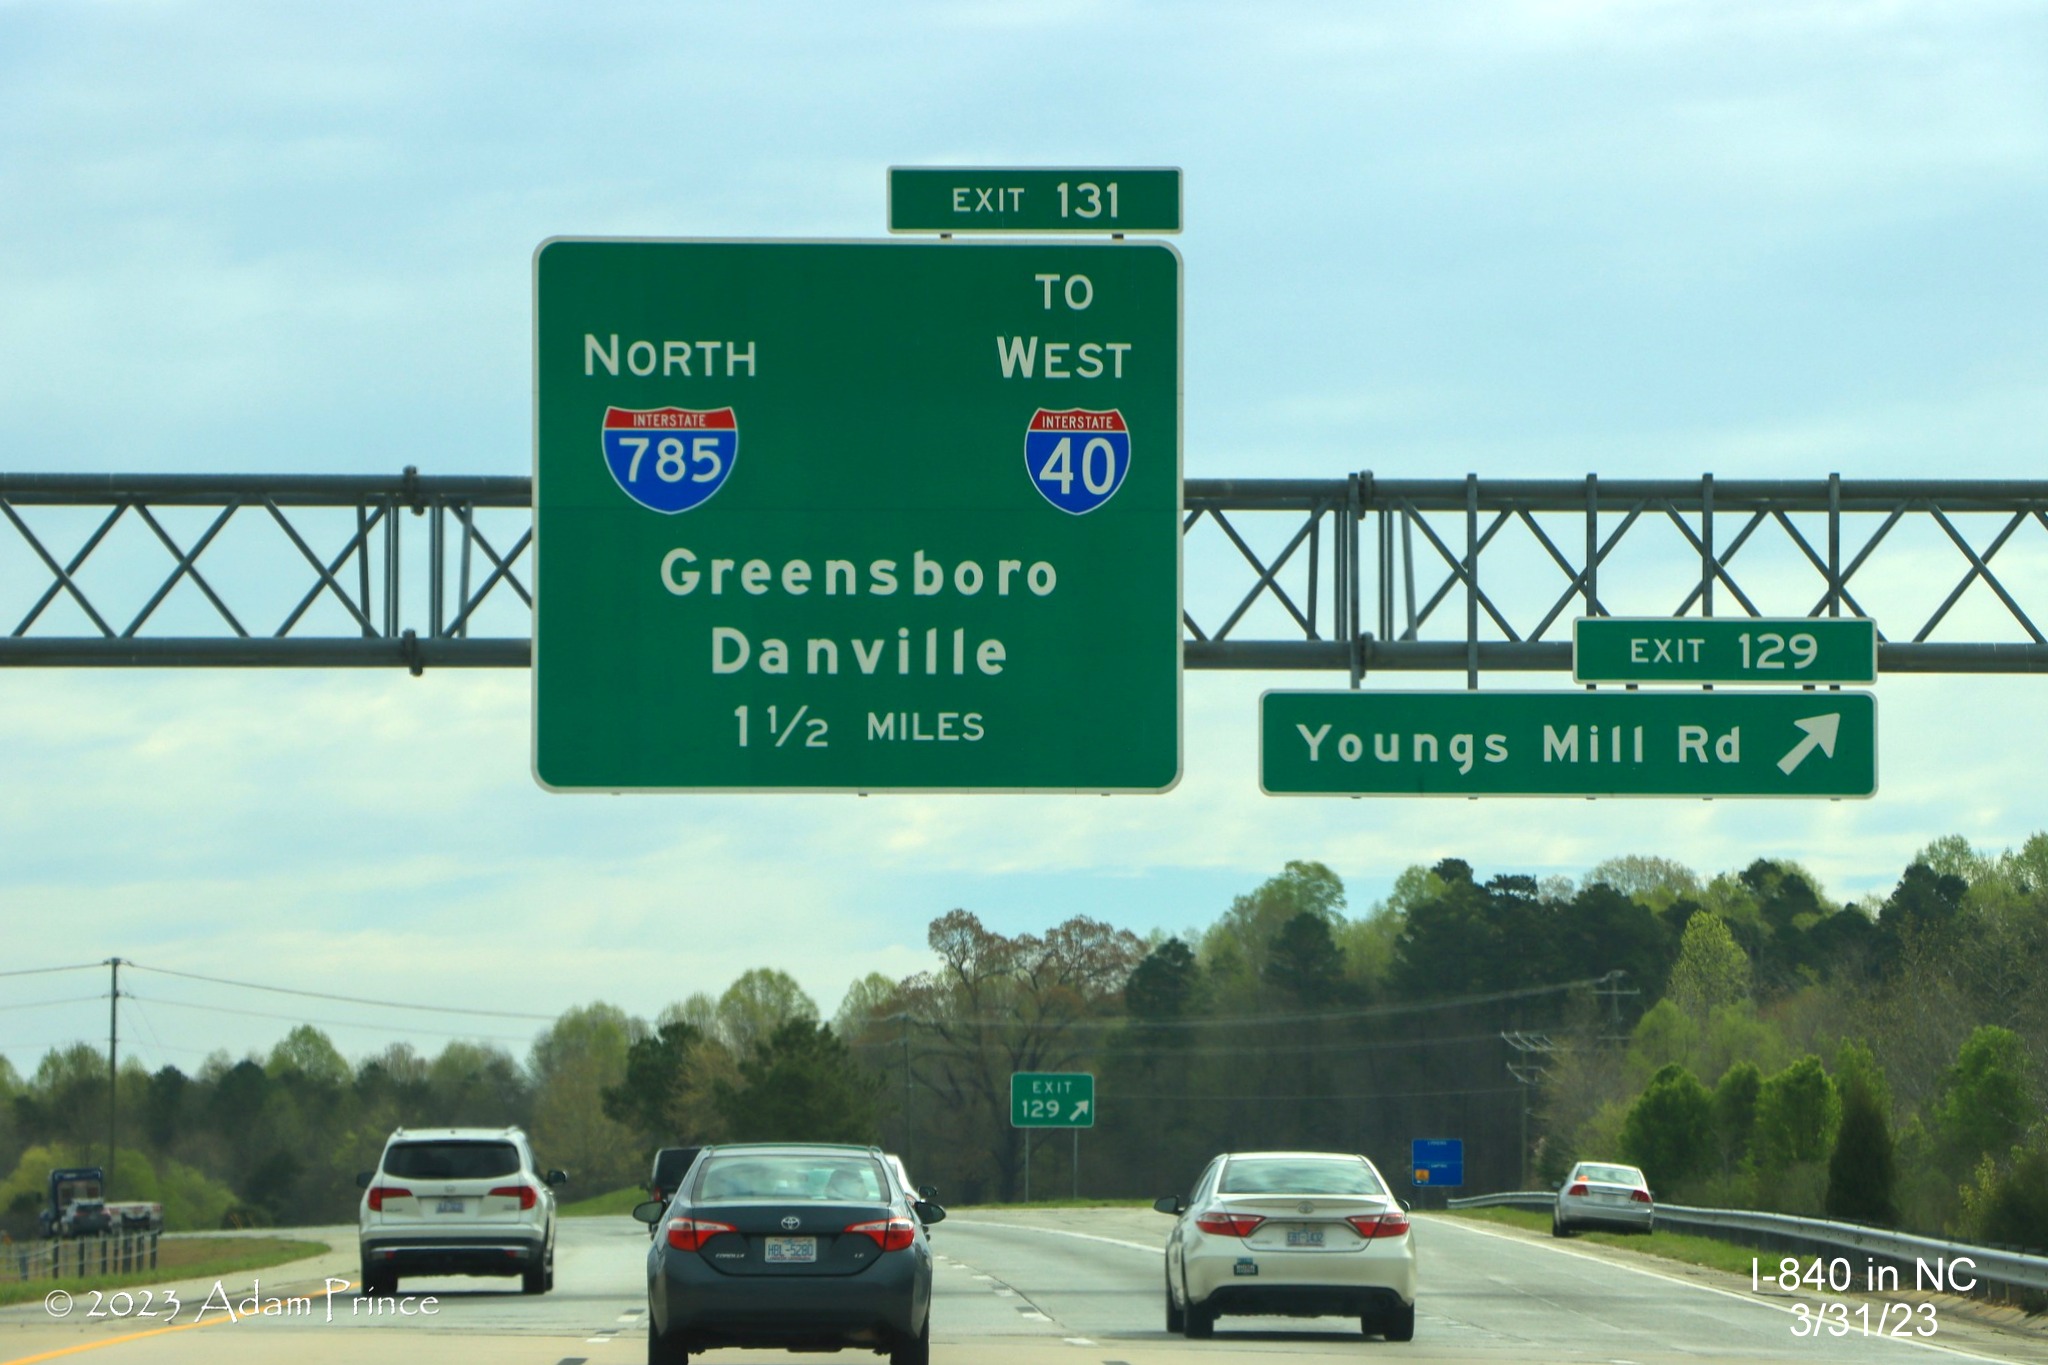 Image of overhead 1 1/2 mile advance sign for northern section of Greensboro Loop on I-85 North still missing 
                                              I-840 shield, Adam Prince,  March 2023